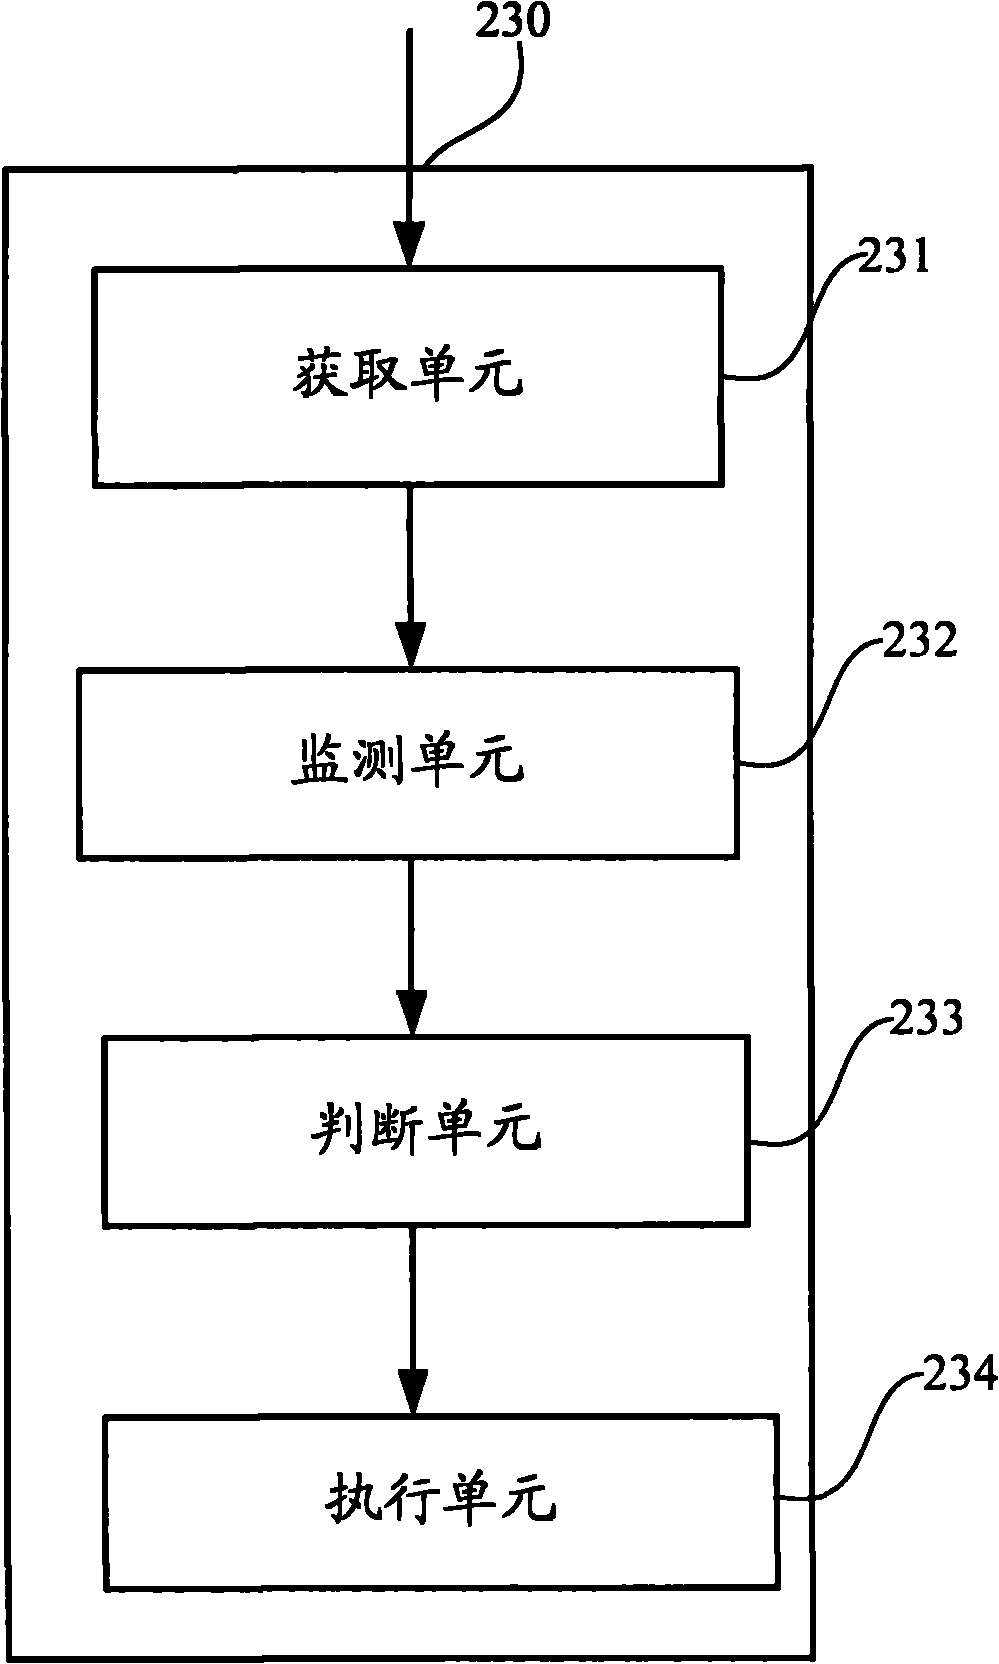 Daemon system and method for application service